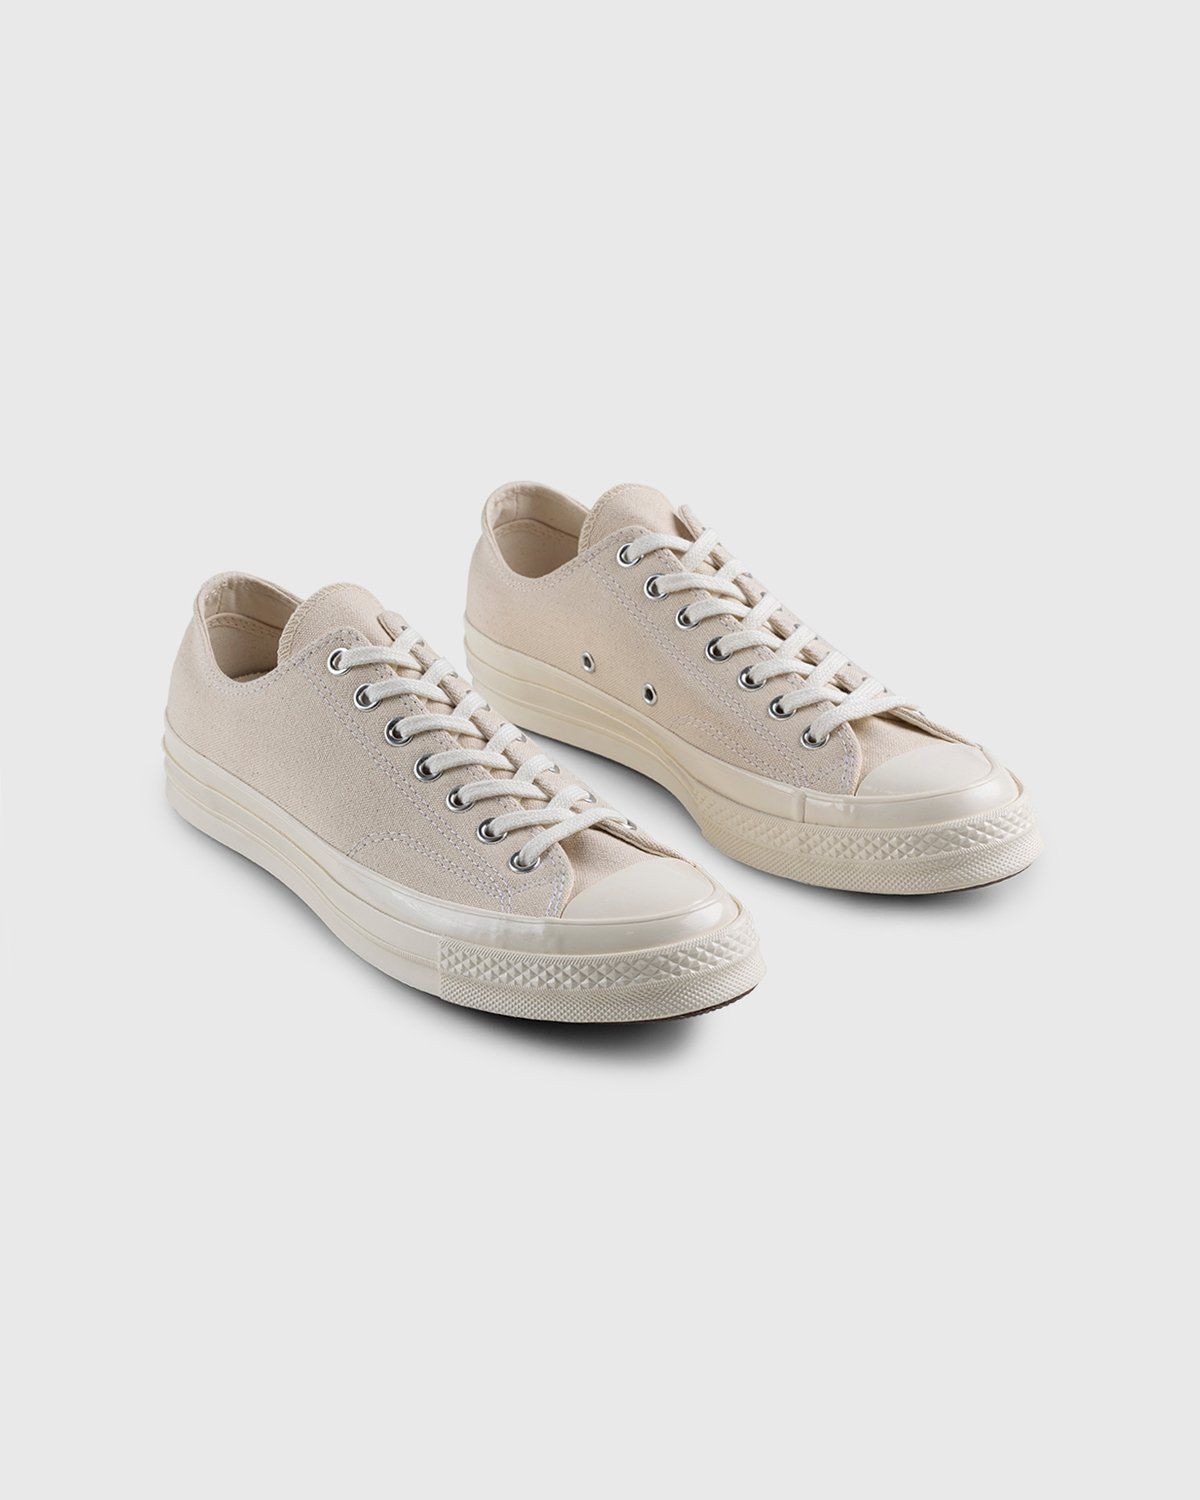 Converse – Chuck 70 Ox Natural/Black/Egret - Low Top Sneakers - Beige - Image 3